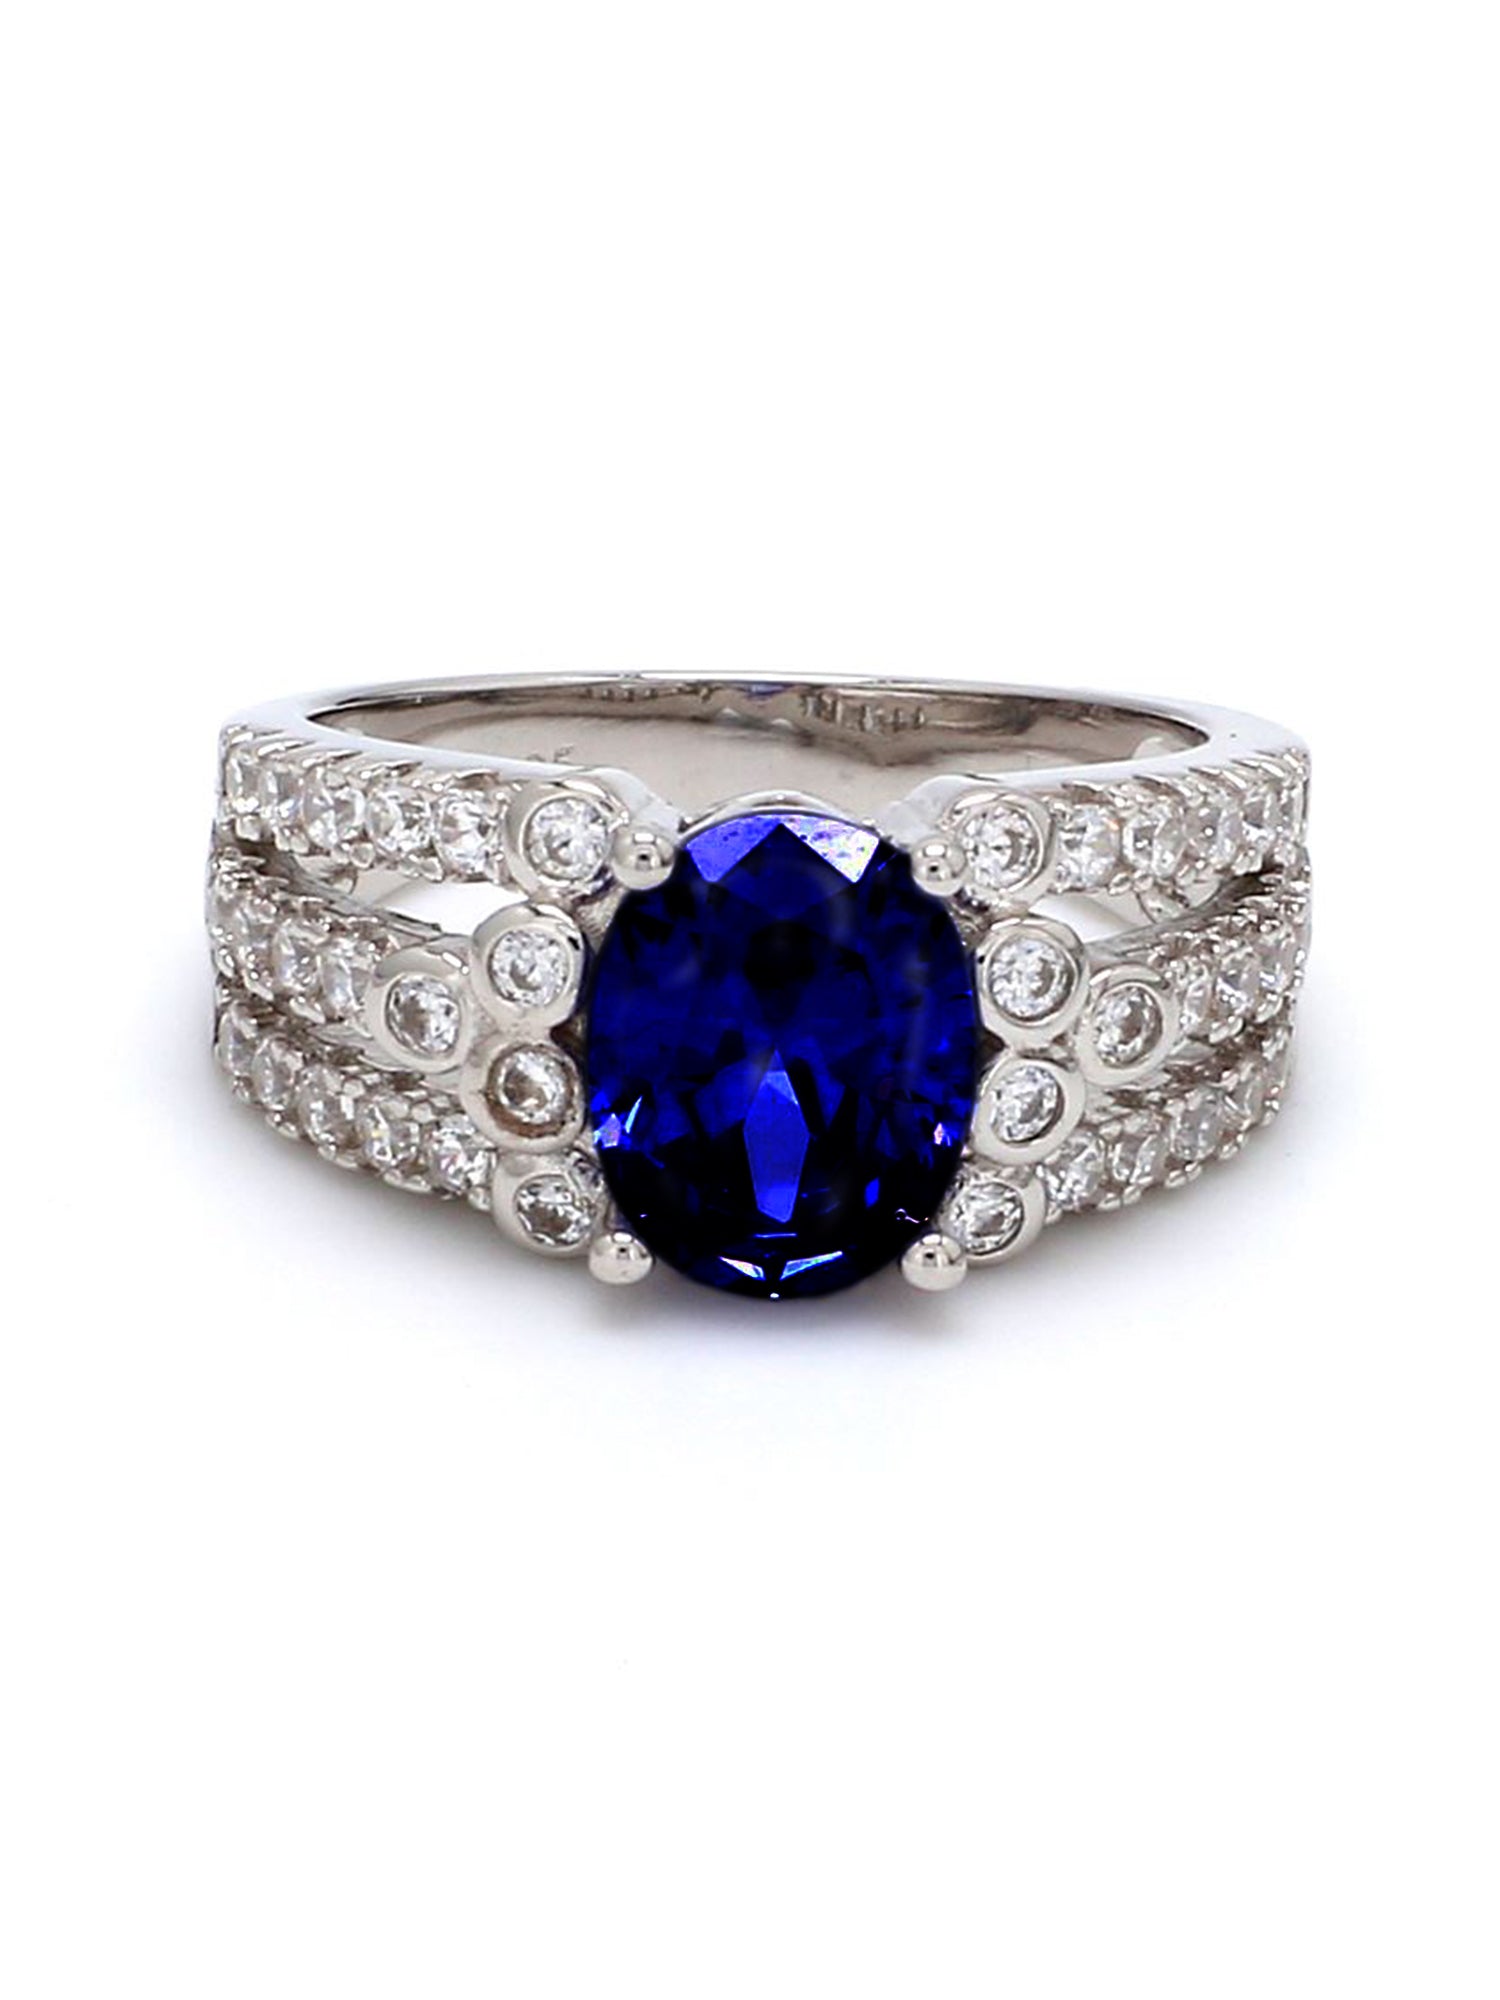 2.5 CARAT OVAL SAPPHIRE SOLITAIRE MULTI ROW RING